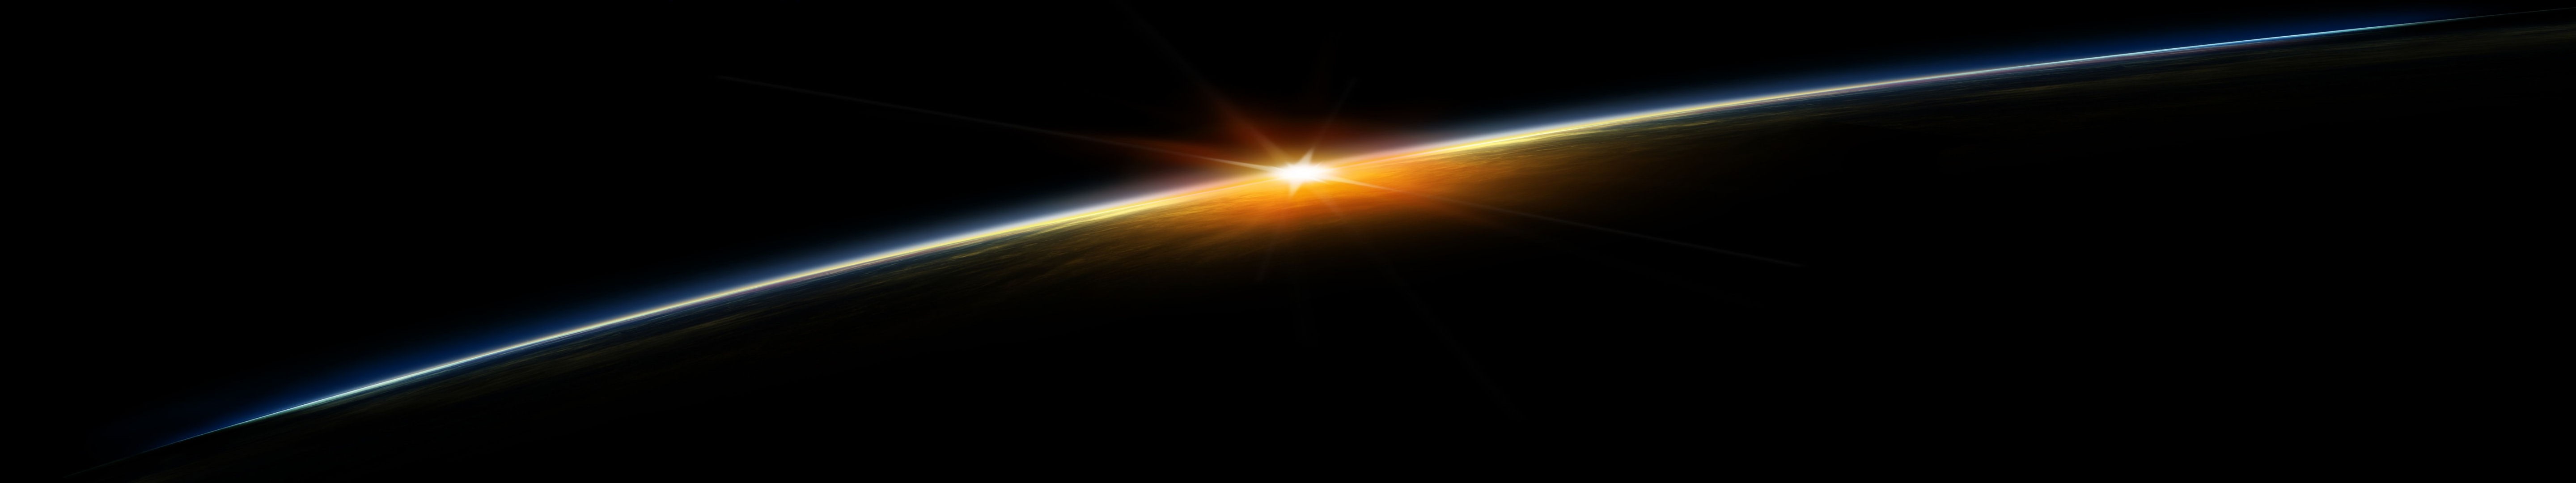 Earth From Space 5760x1080